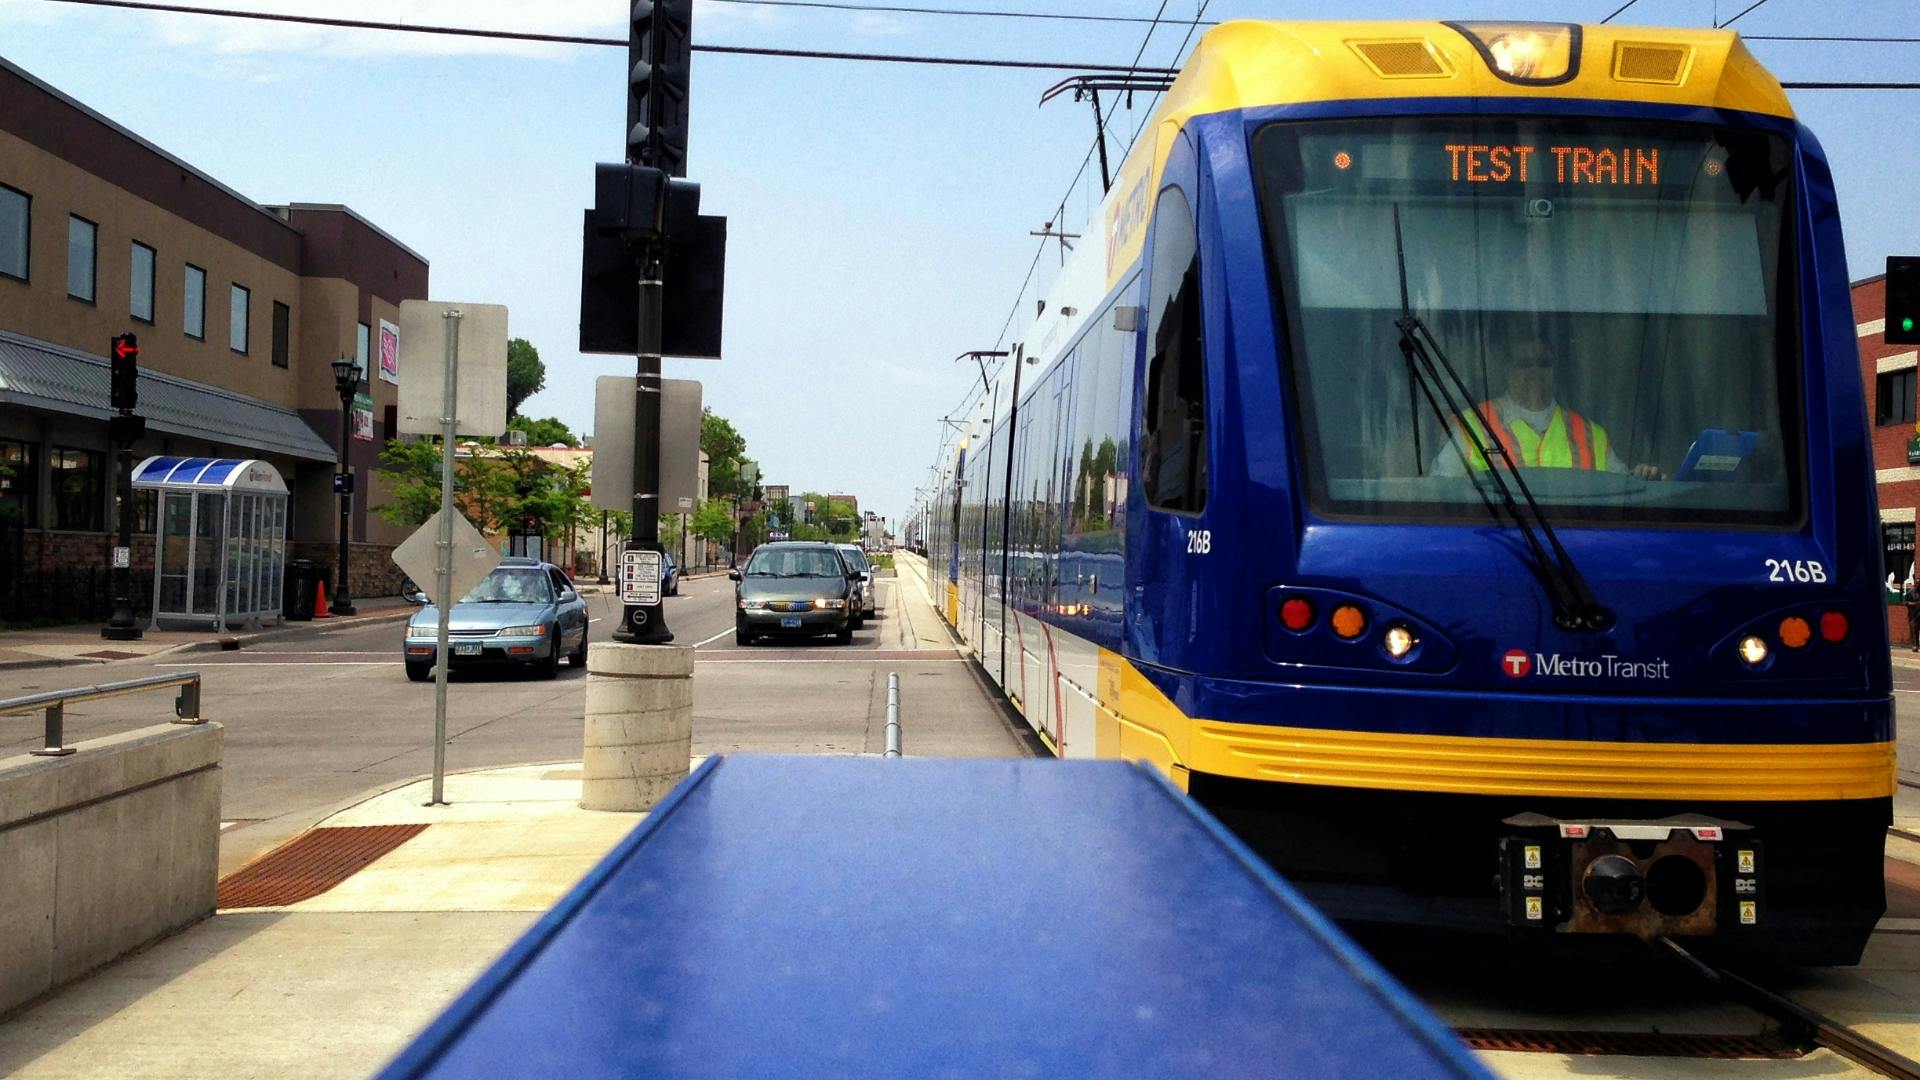 Ride along with the Star Tribune's Vineeta Sawkar as she asks the Metro Transit spokesperson to point out key areas drivers, walkers and bicyclists should watch for as they navigate around the Green Line.